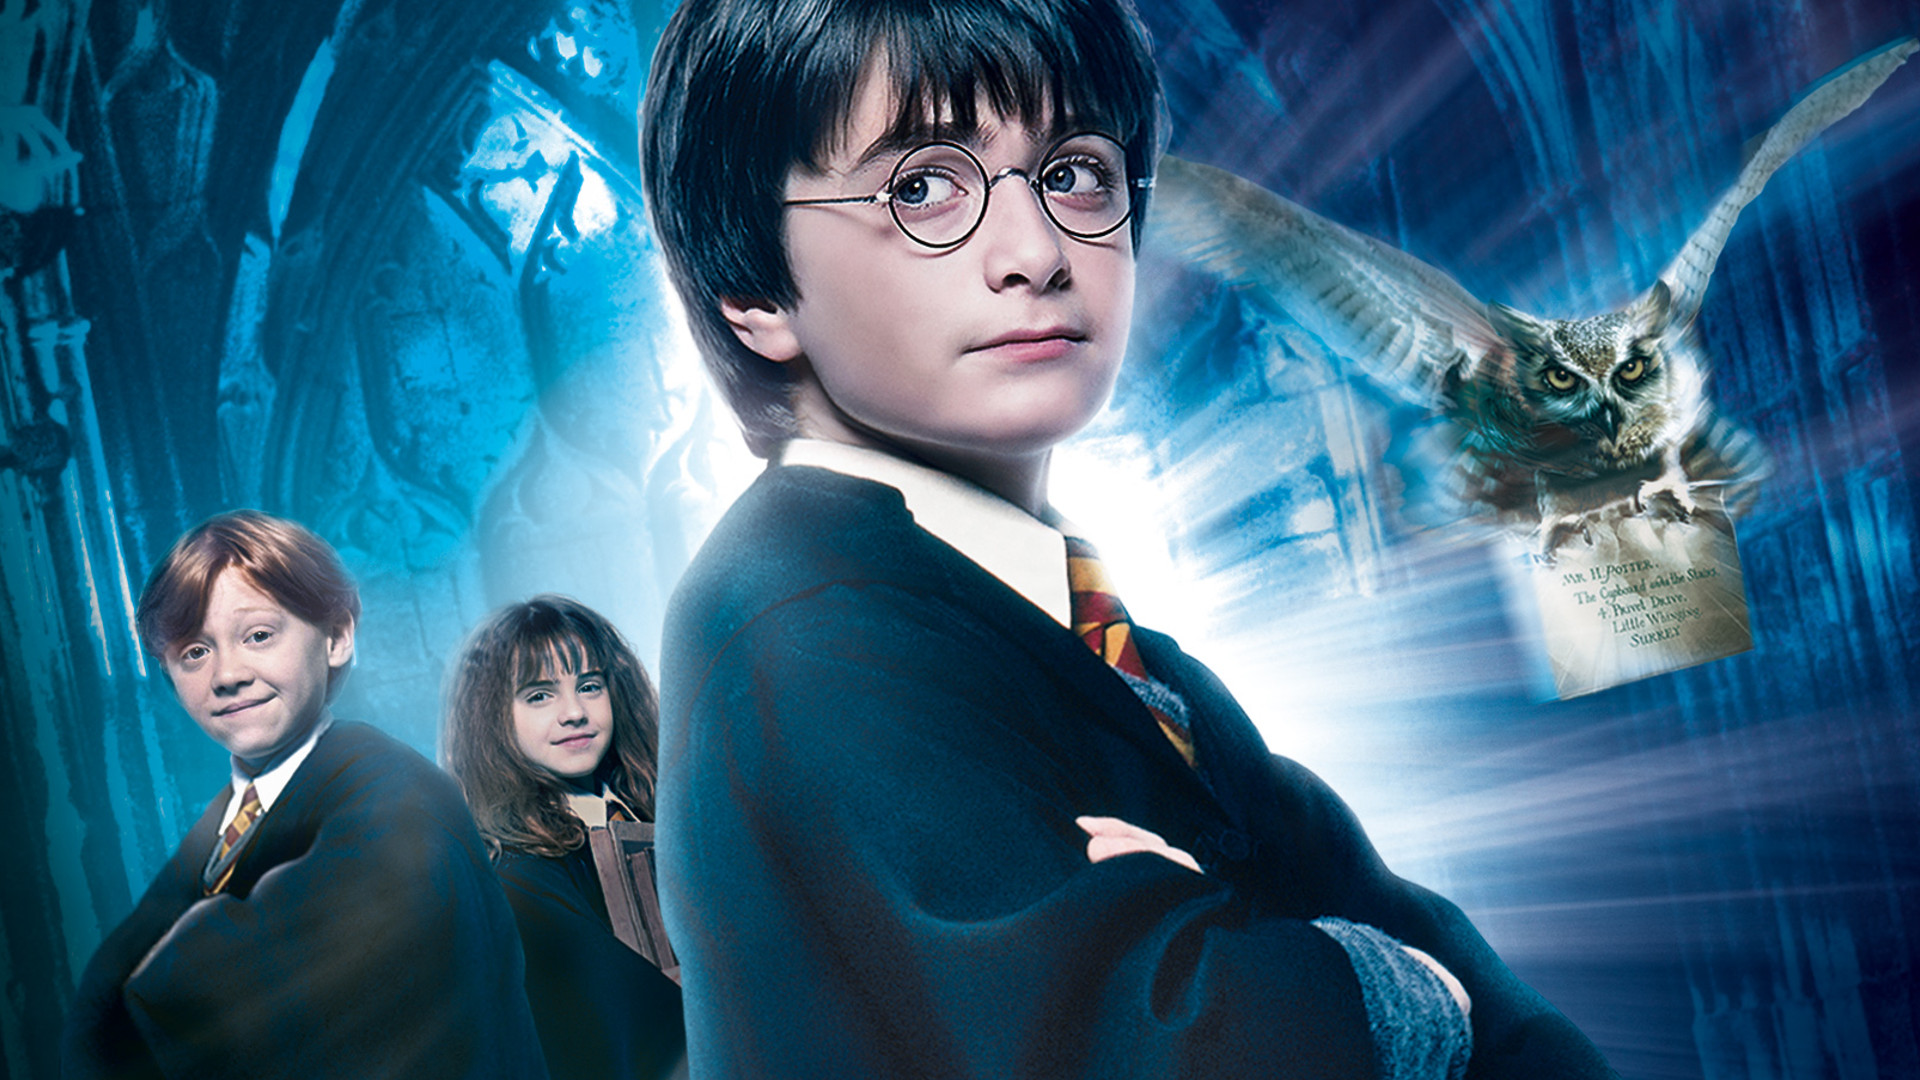 Harry Potter And The Philosopher's Stone HD wallpapers, Desktop wallpaper - most viewed